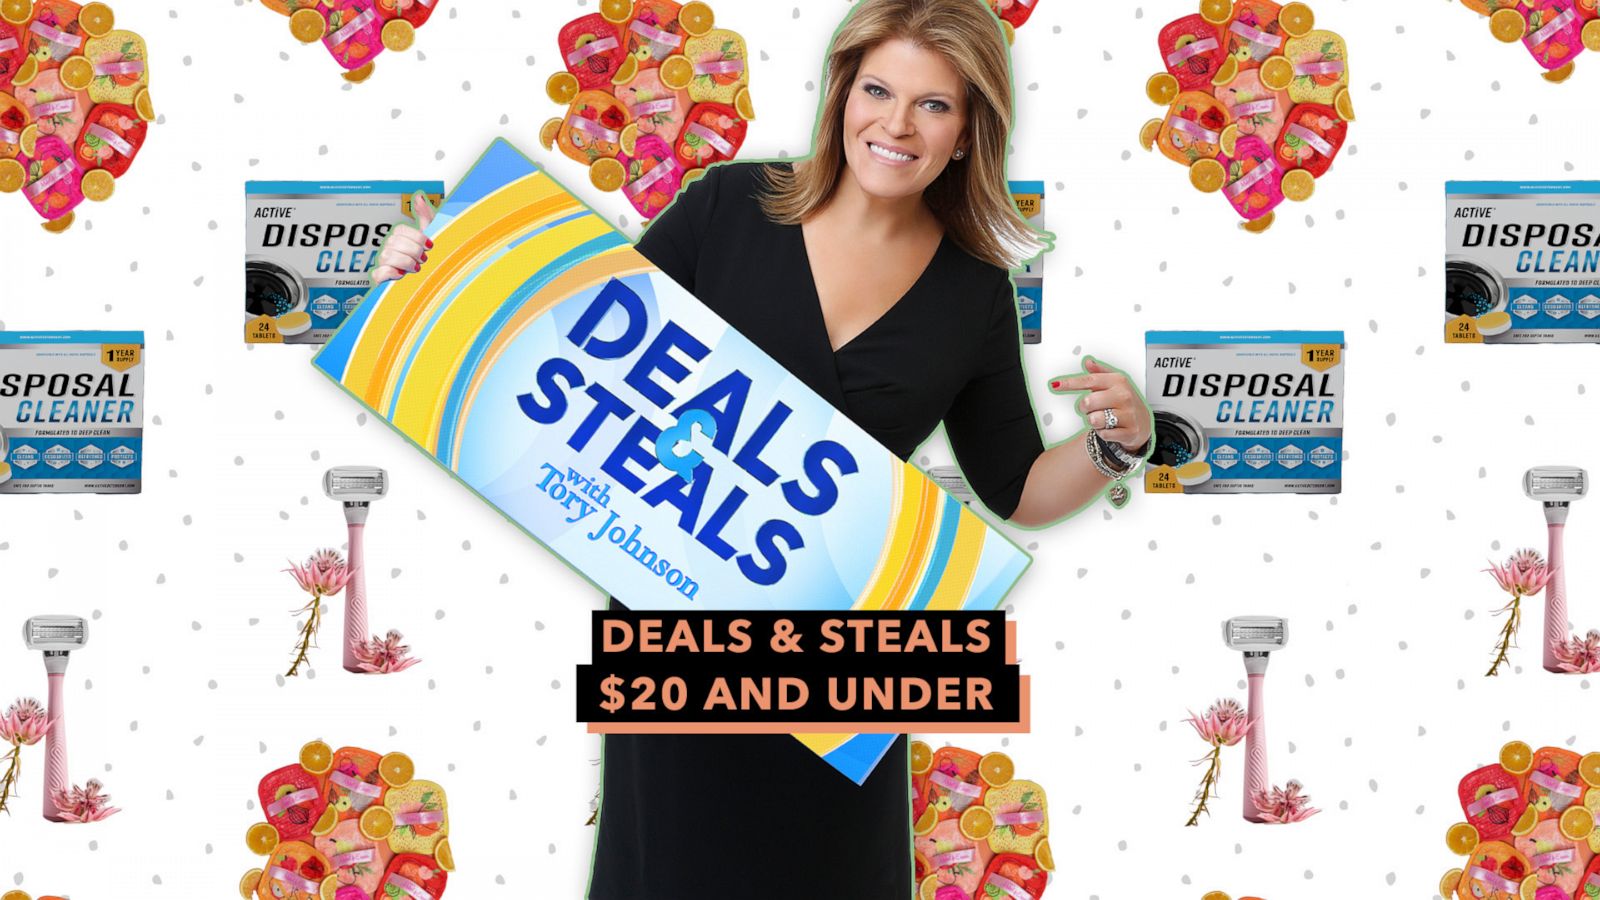 GMA' Deals & Steals $20 and under - Good Morning America